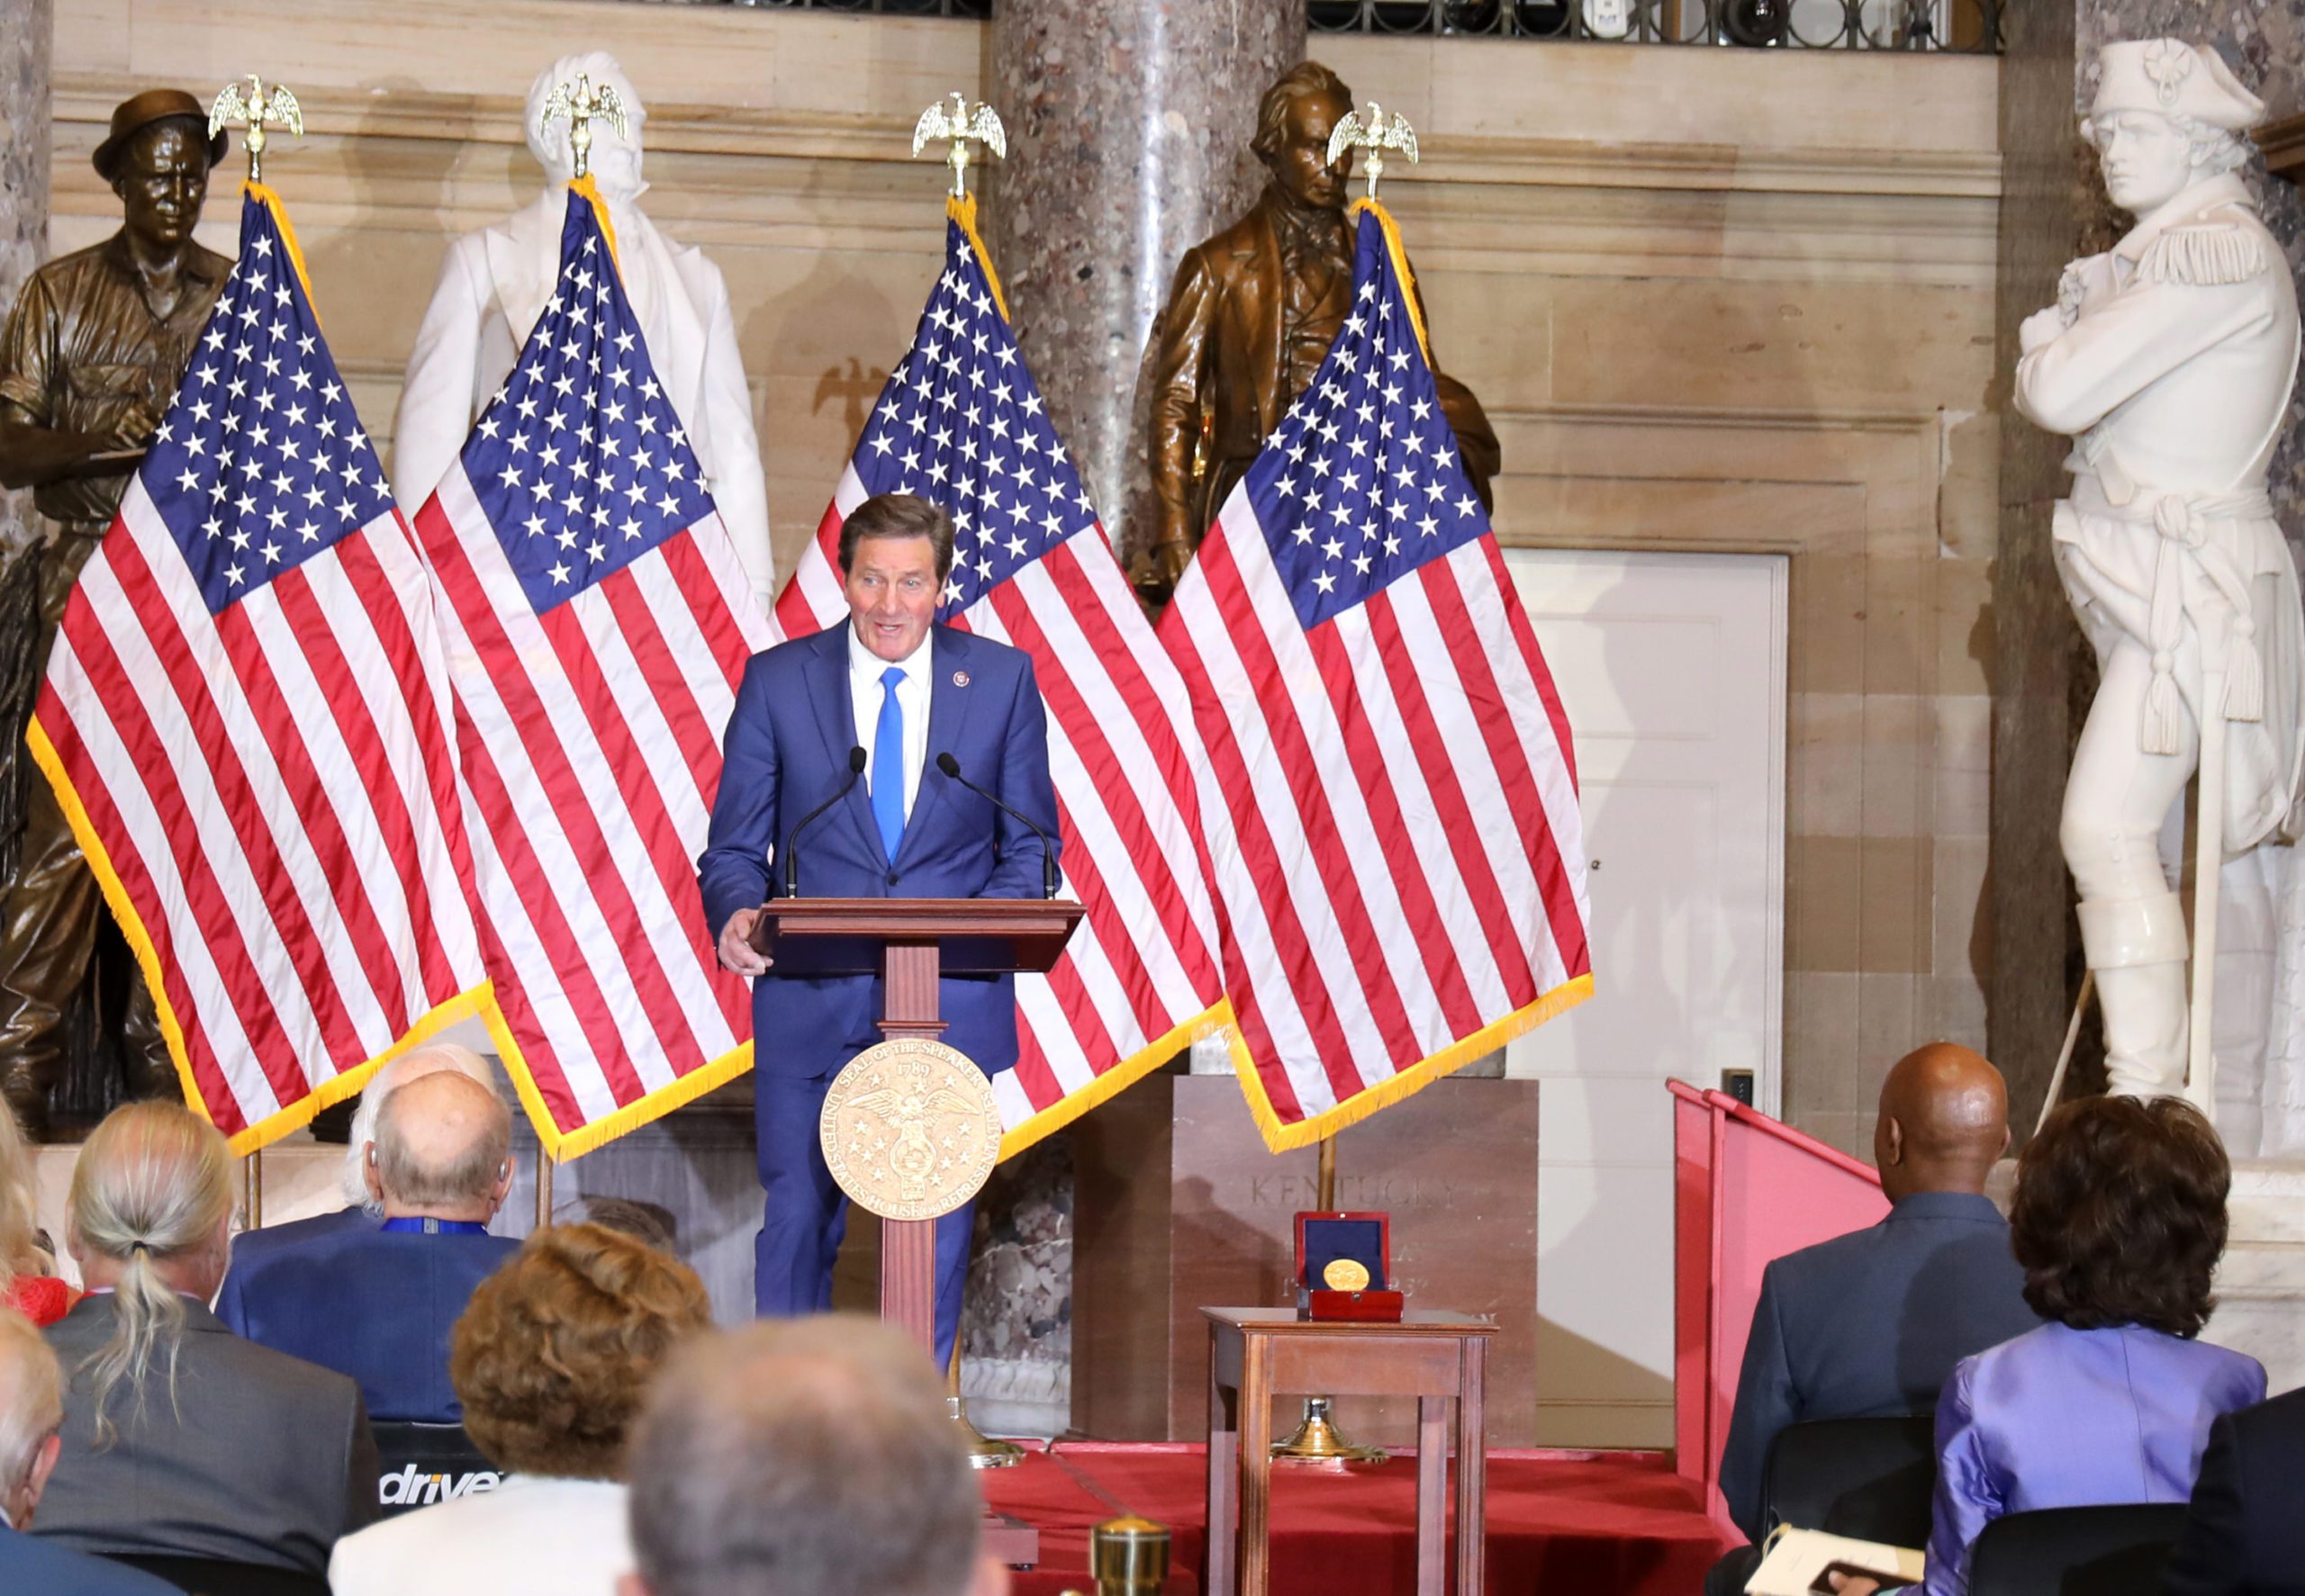 Congressman John Garamendi, U.S. Representative for California's 3nd District, addresses the audience during the Congressional Gold Medal Ceremony held to honor Merchant Mariners of WWII at the U.S. Capital, May 18, 2022. U.S. Navy photo by Bill Mesta